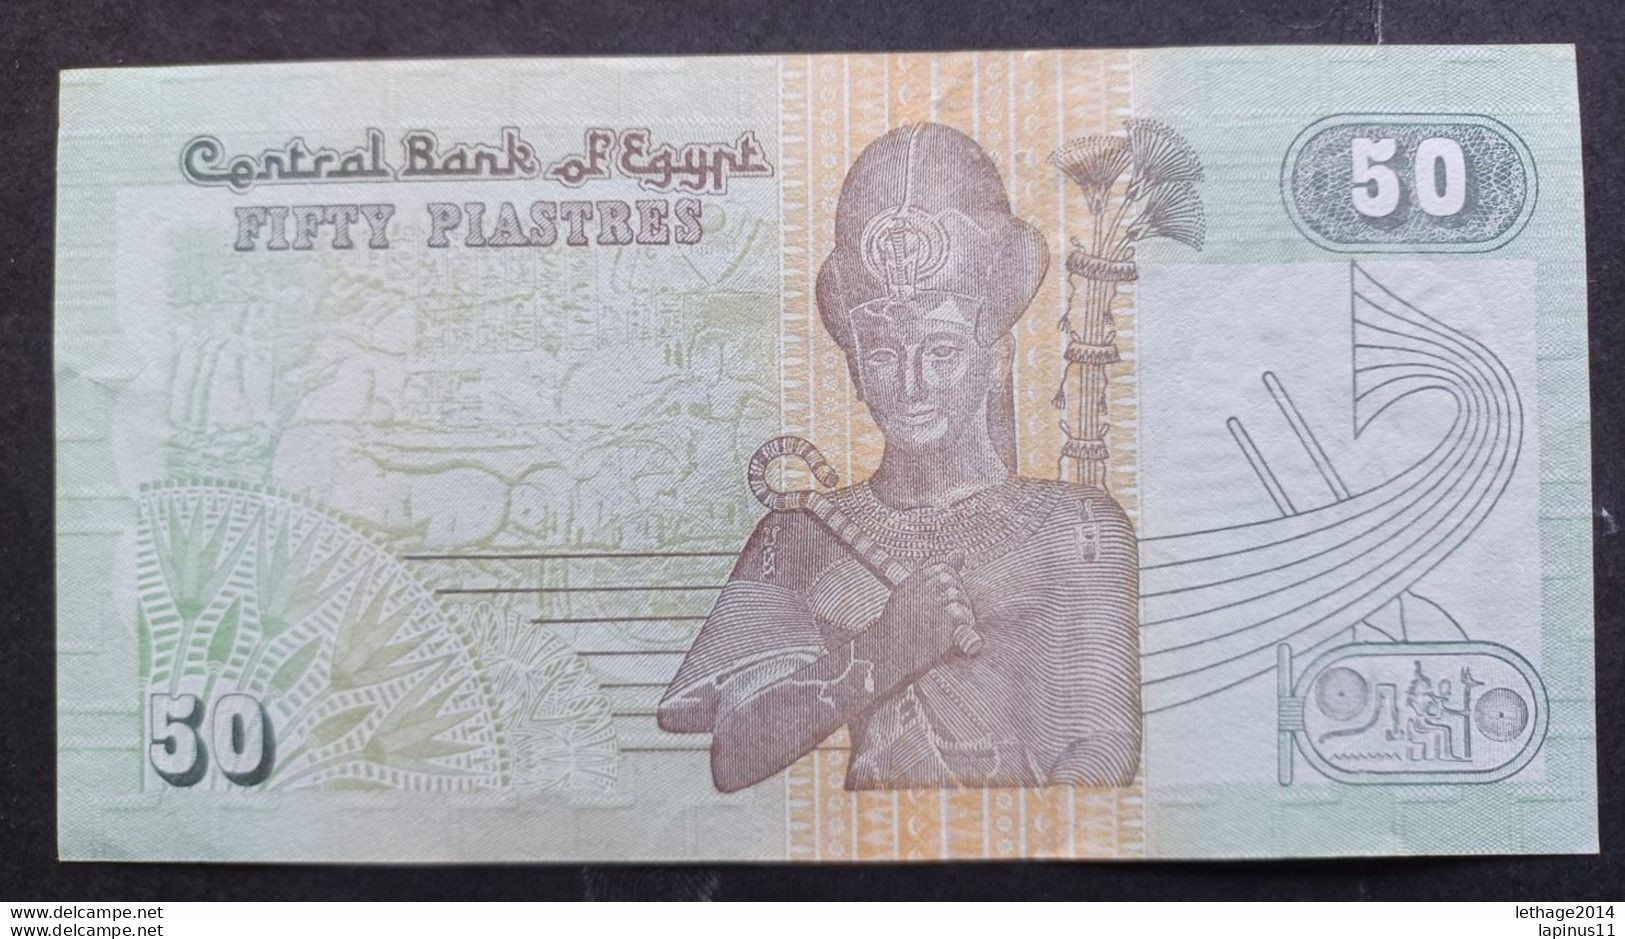 BANKNOTE EGYPT EGYPT 50 PIASTRES 1992 UNCIRCULATED SUPERB - Aegypten